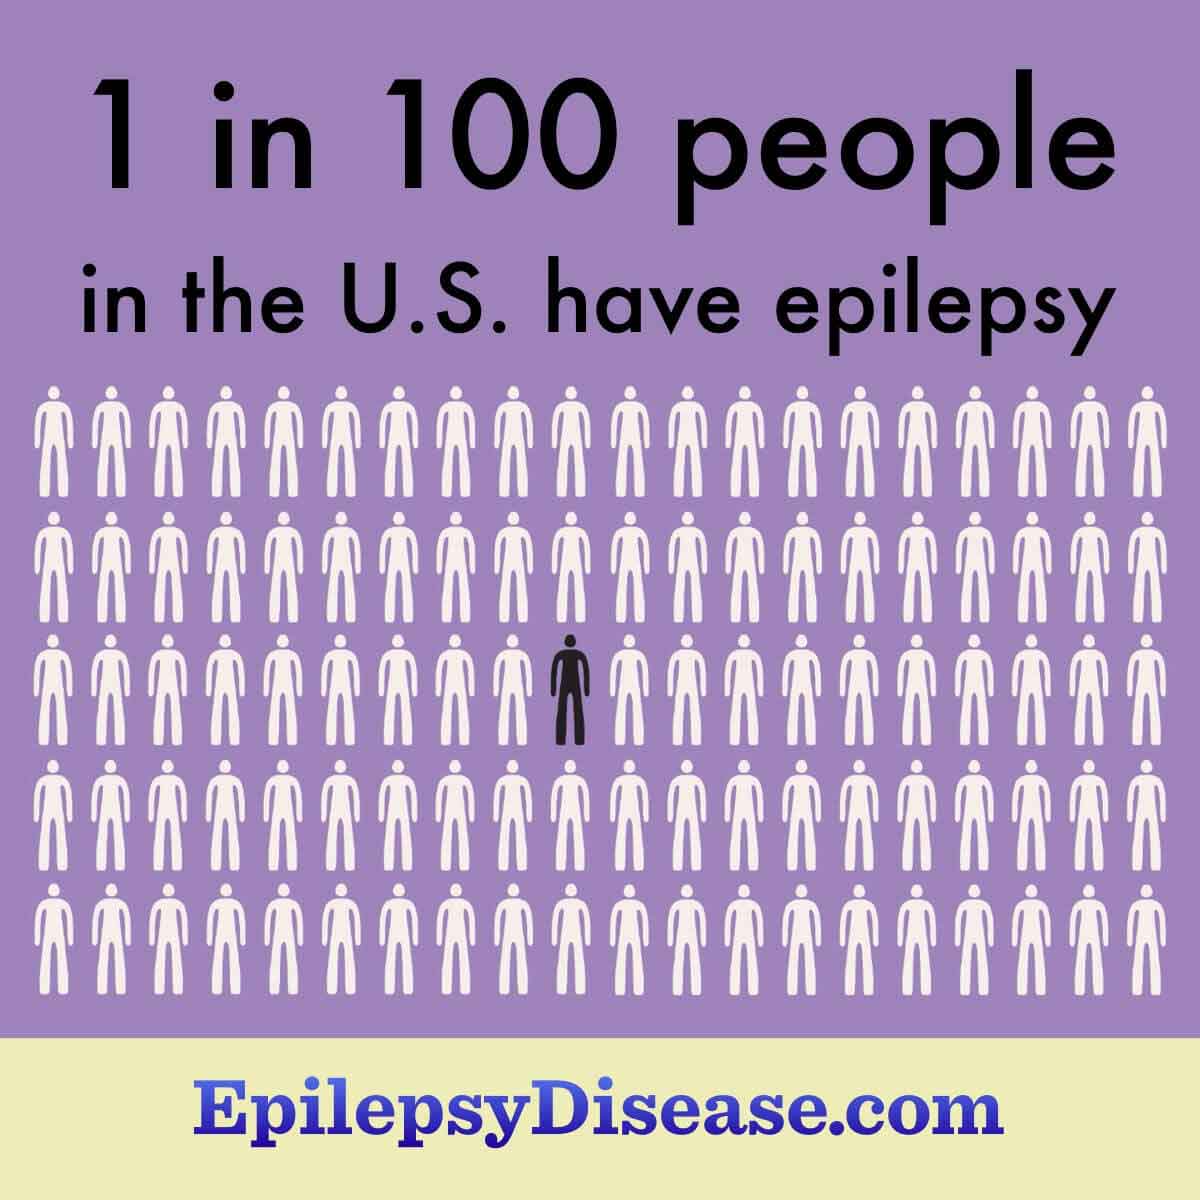 100 stick figures, 1 is highlighted to show that 1 in 100 people have epilepsy